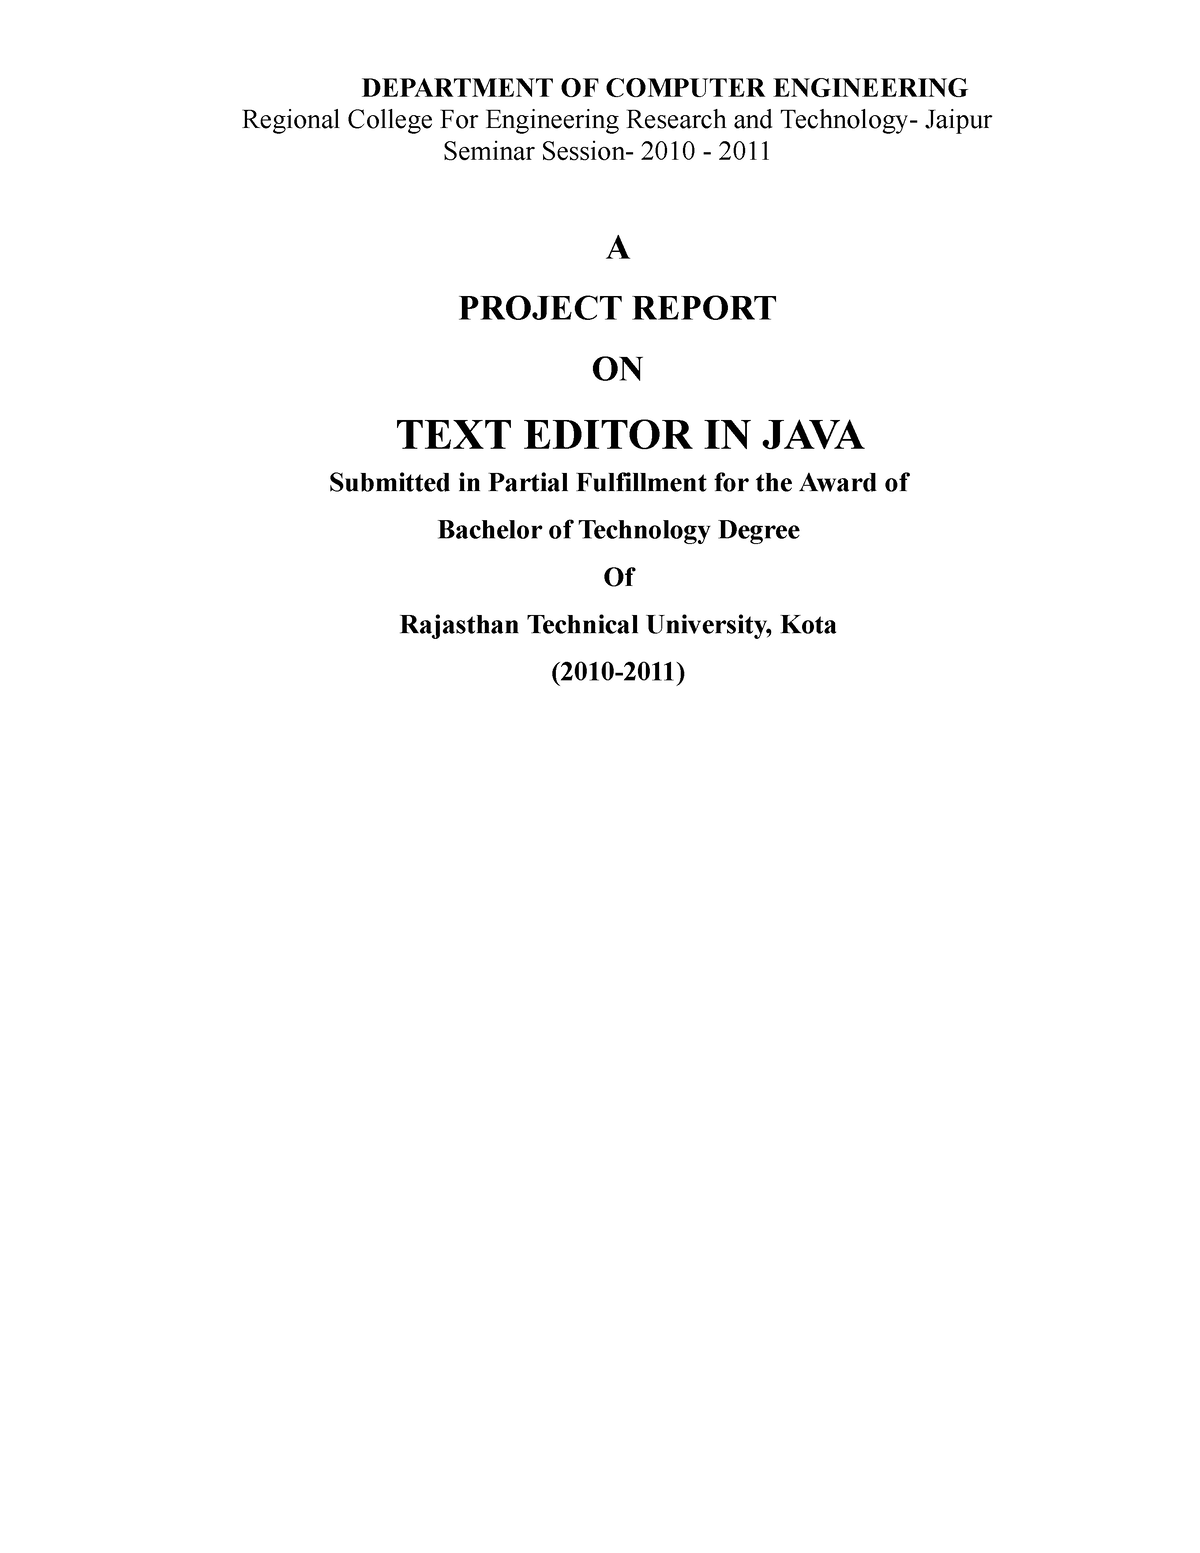 project-report-text-editor-in-java-department-of-computer-engineering